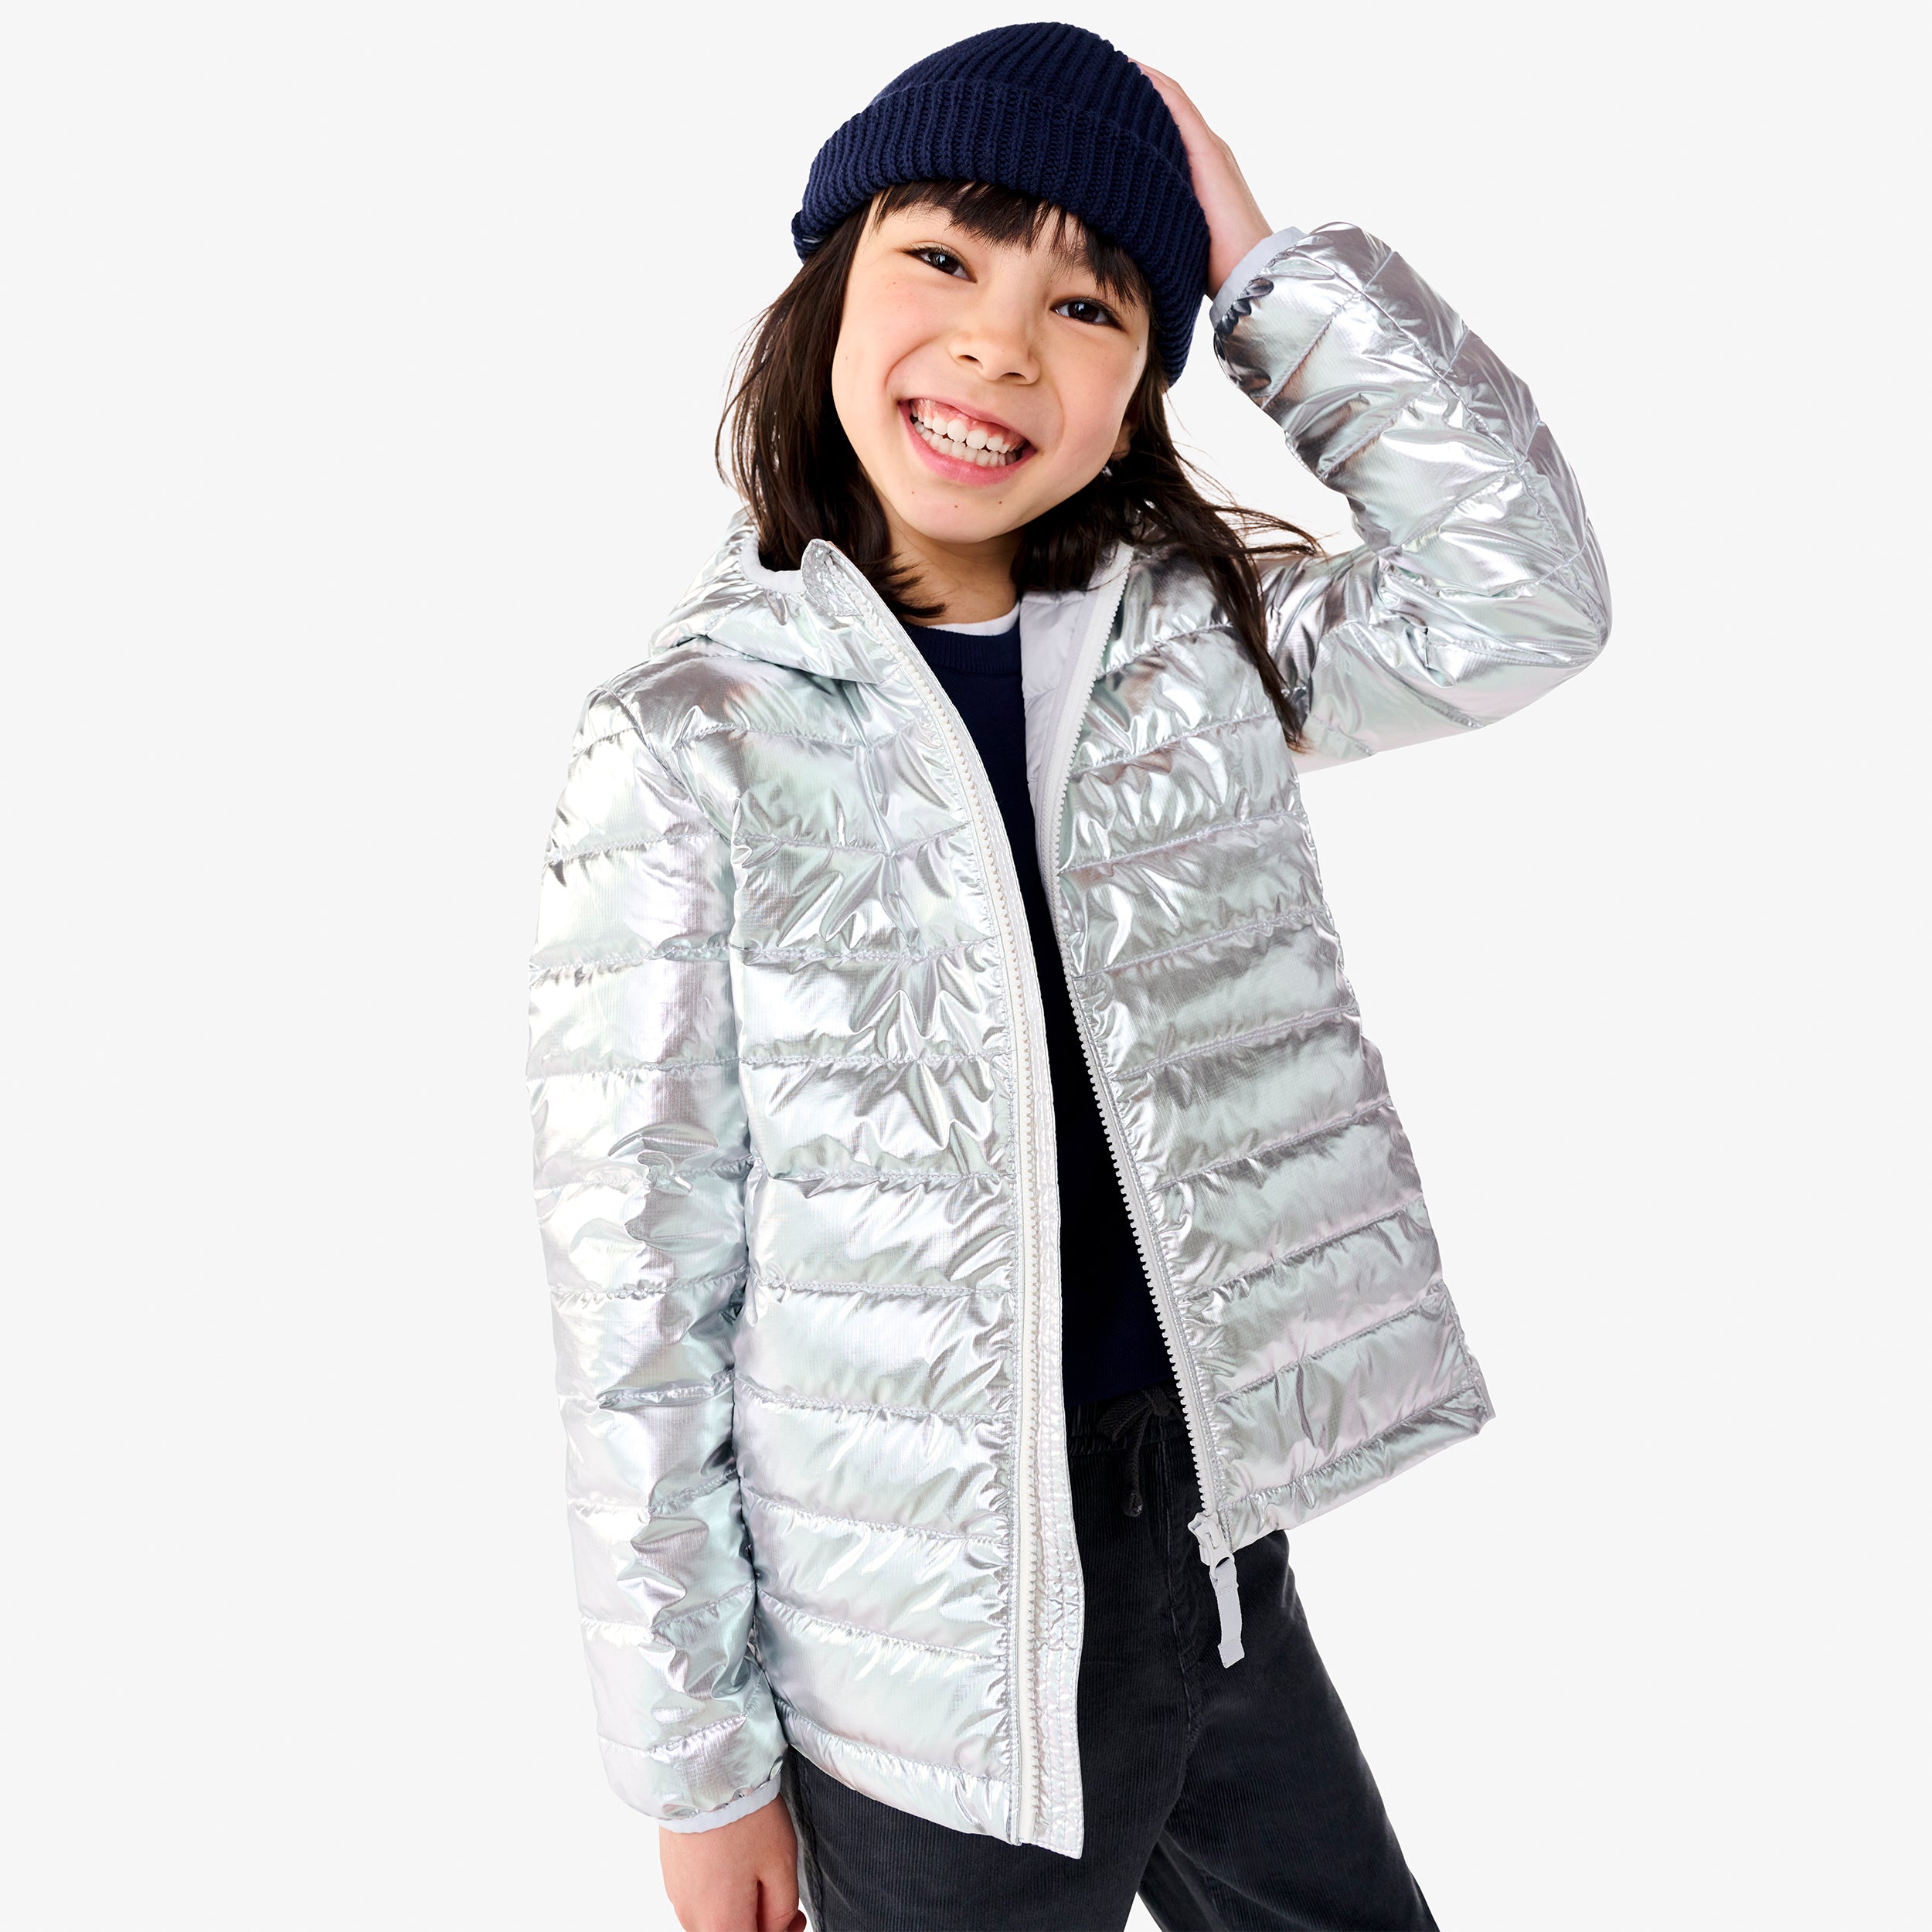 Kids Only Padded Jacket - CookNewemmy - Clear Sky/Silver Trim